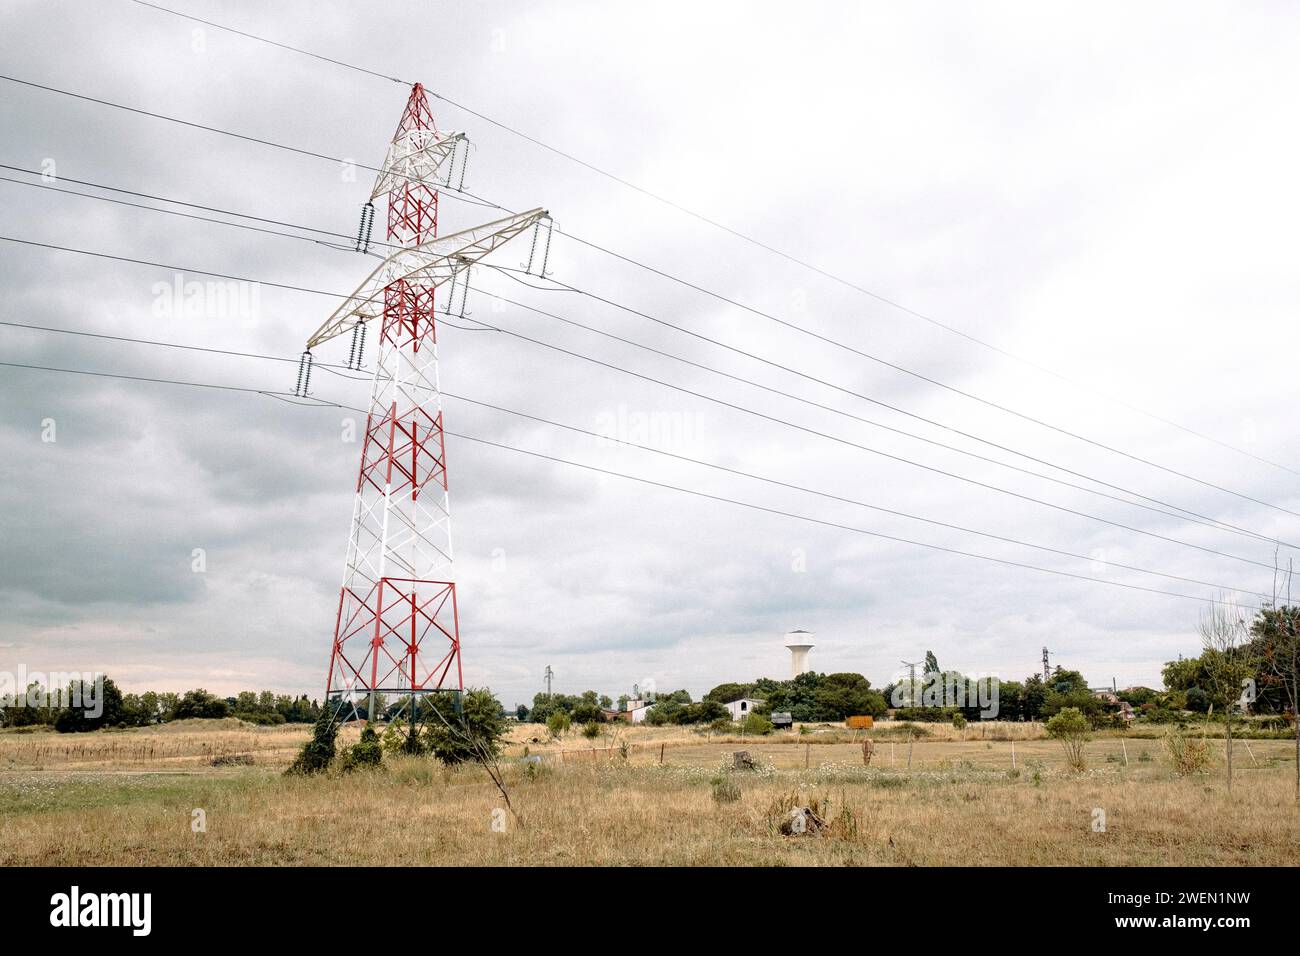 A towering electricity pylon stands against a cloudy sky, with multiple high-voltage power lines extending into the distance over a rural landscape. Stock Photo